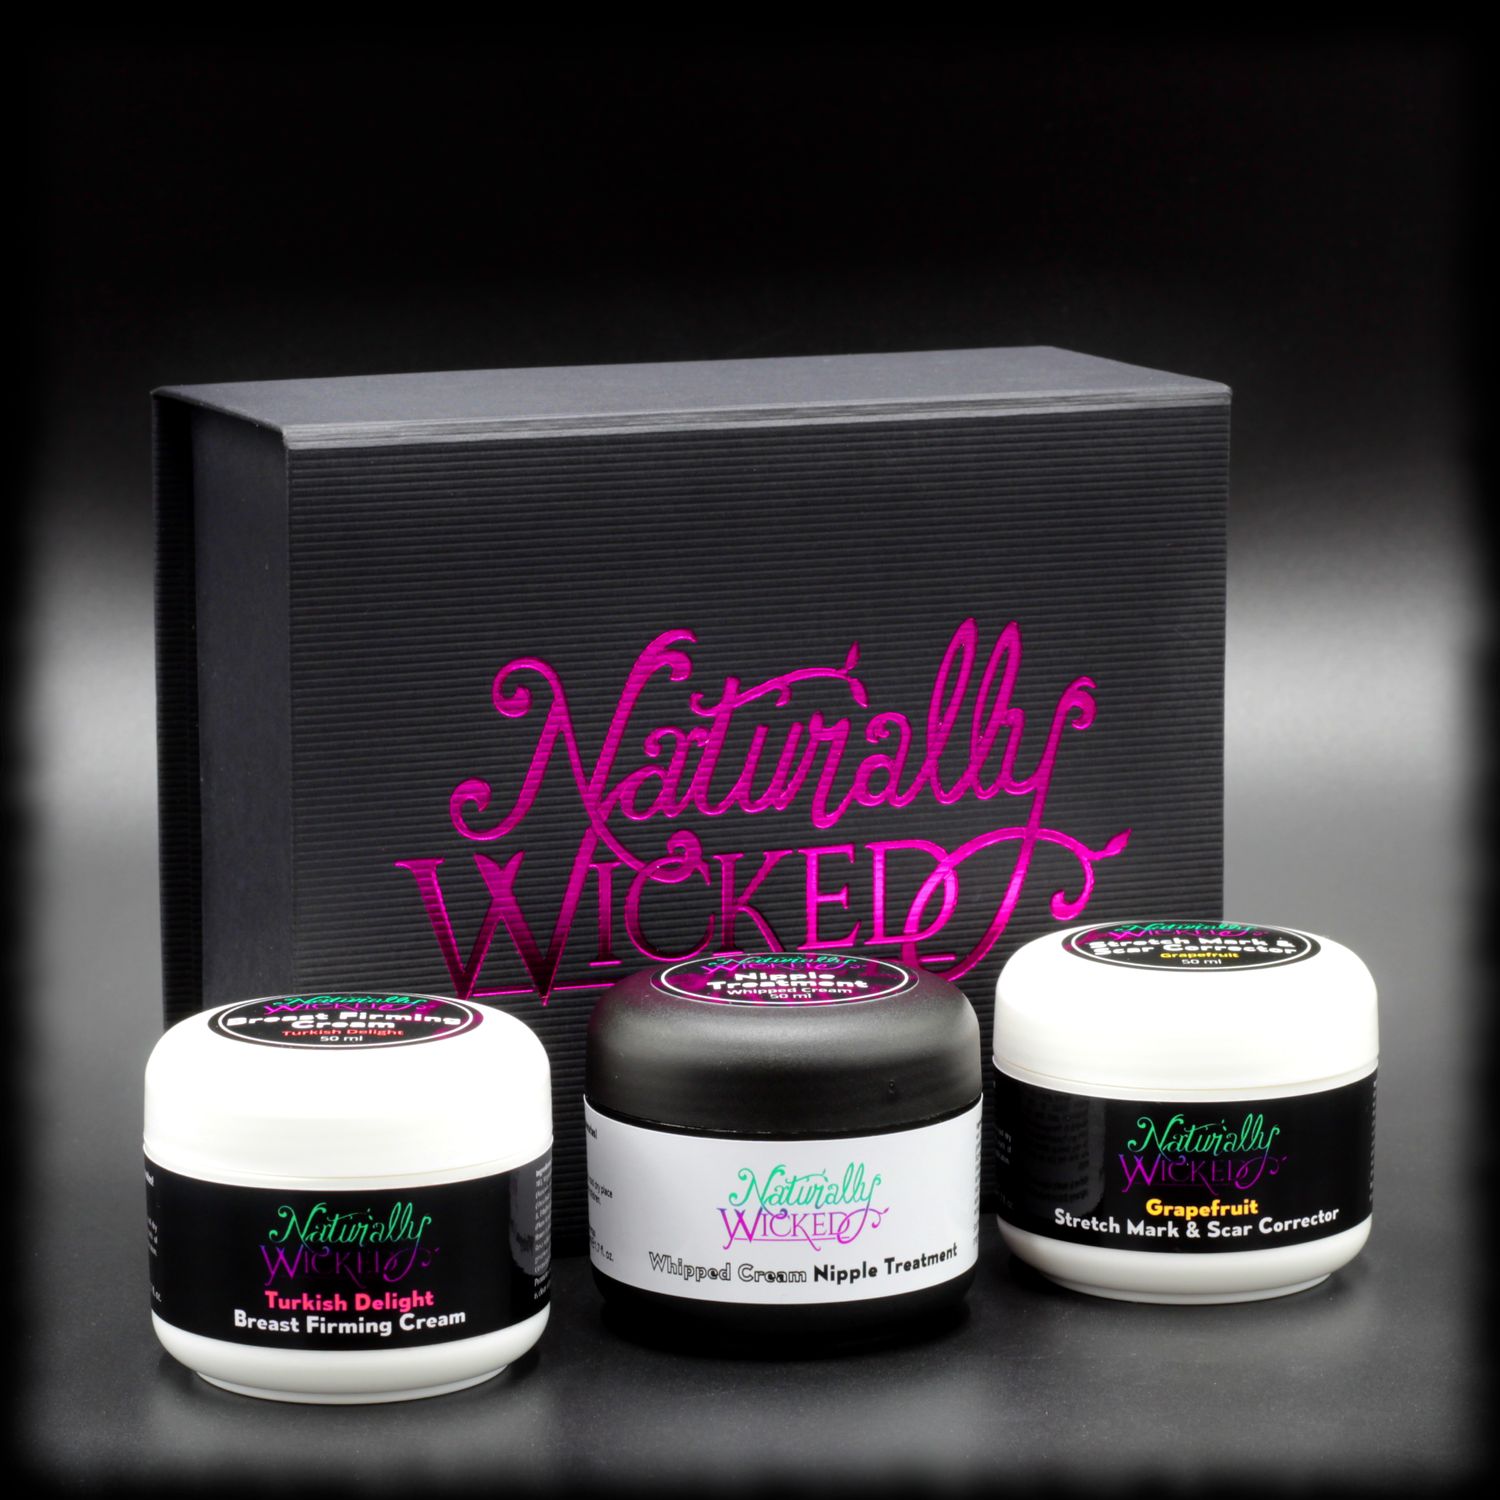 Naturally Wicked Original 3 Step Mamma Kit With Turkish Delight Breast Firming Cream, Whipped Cream Nipple Treatment & Grapefruit Stretch Mark & Scar Corrector In Front Of Black & Pink Naturally Wicked Original Box